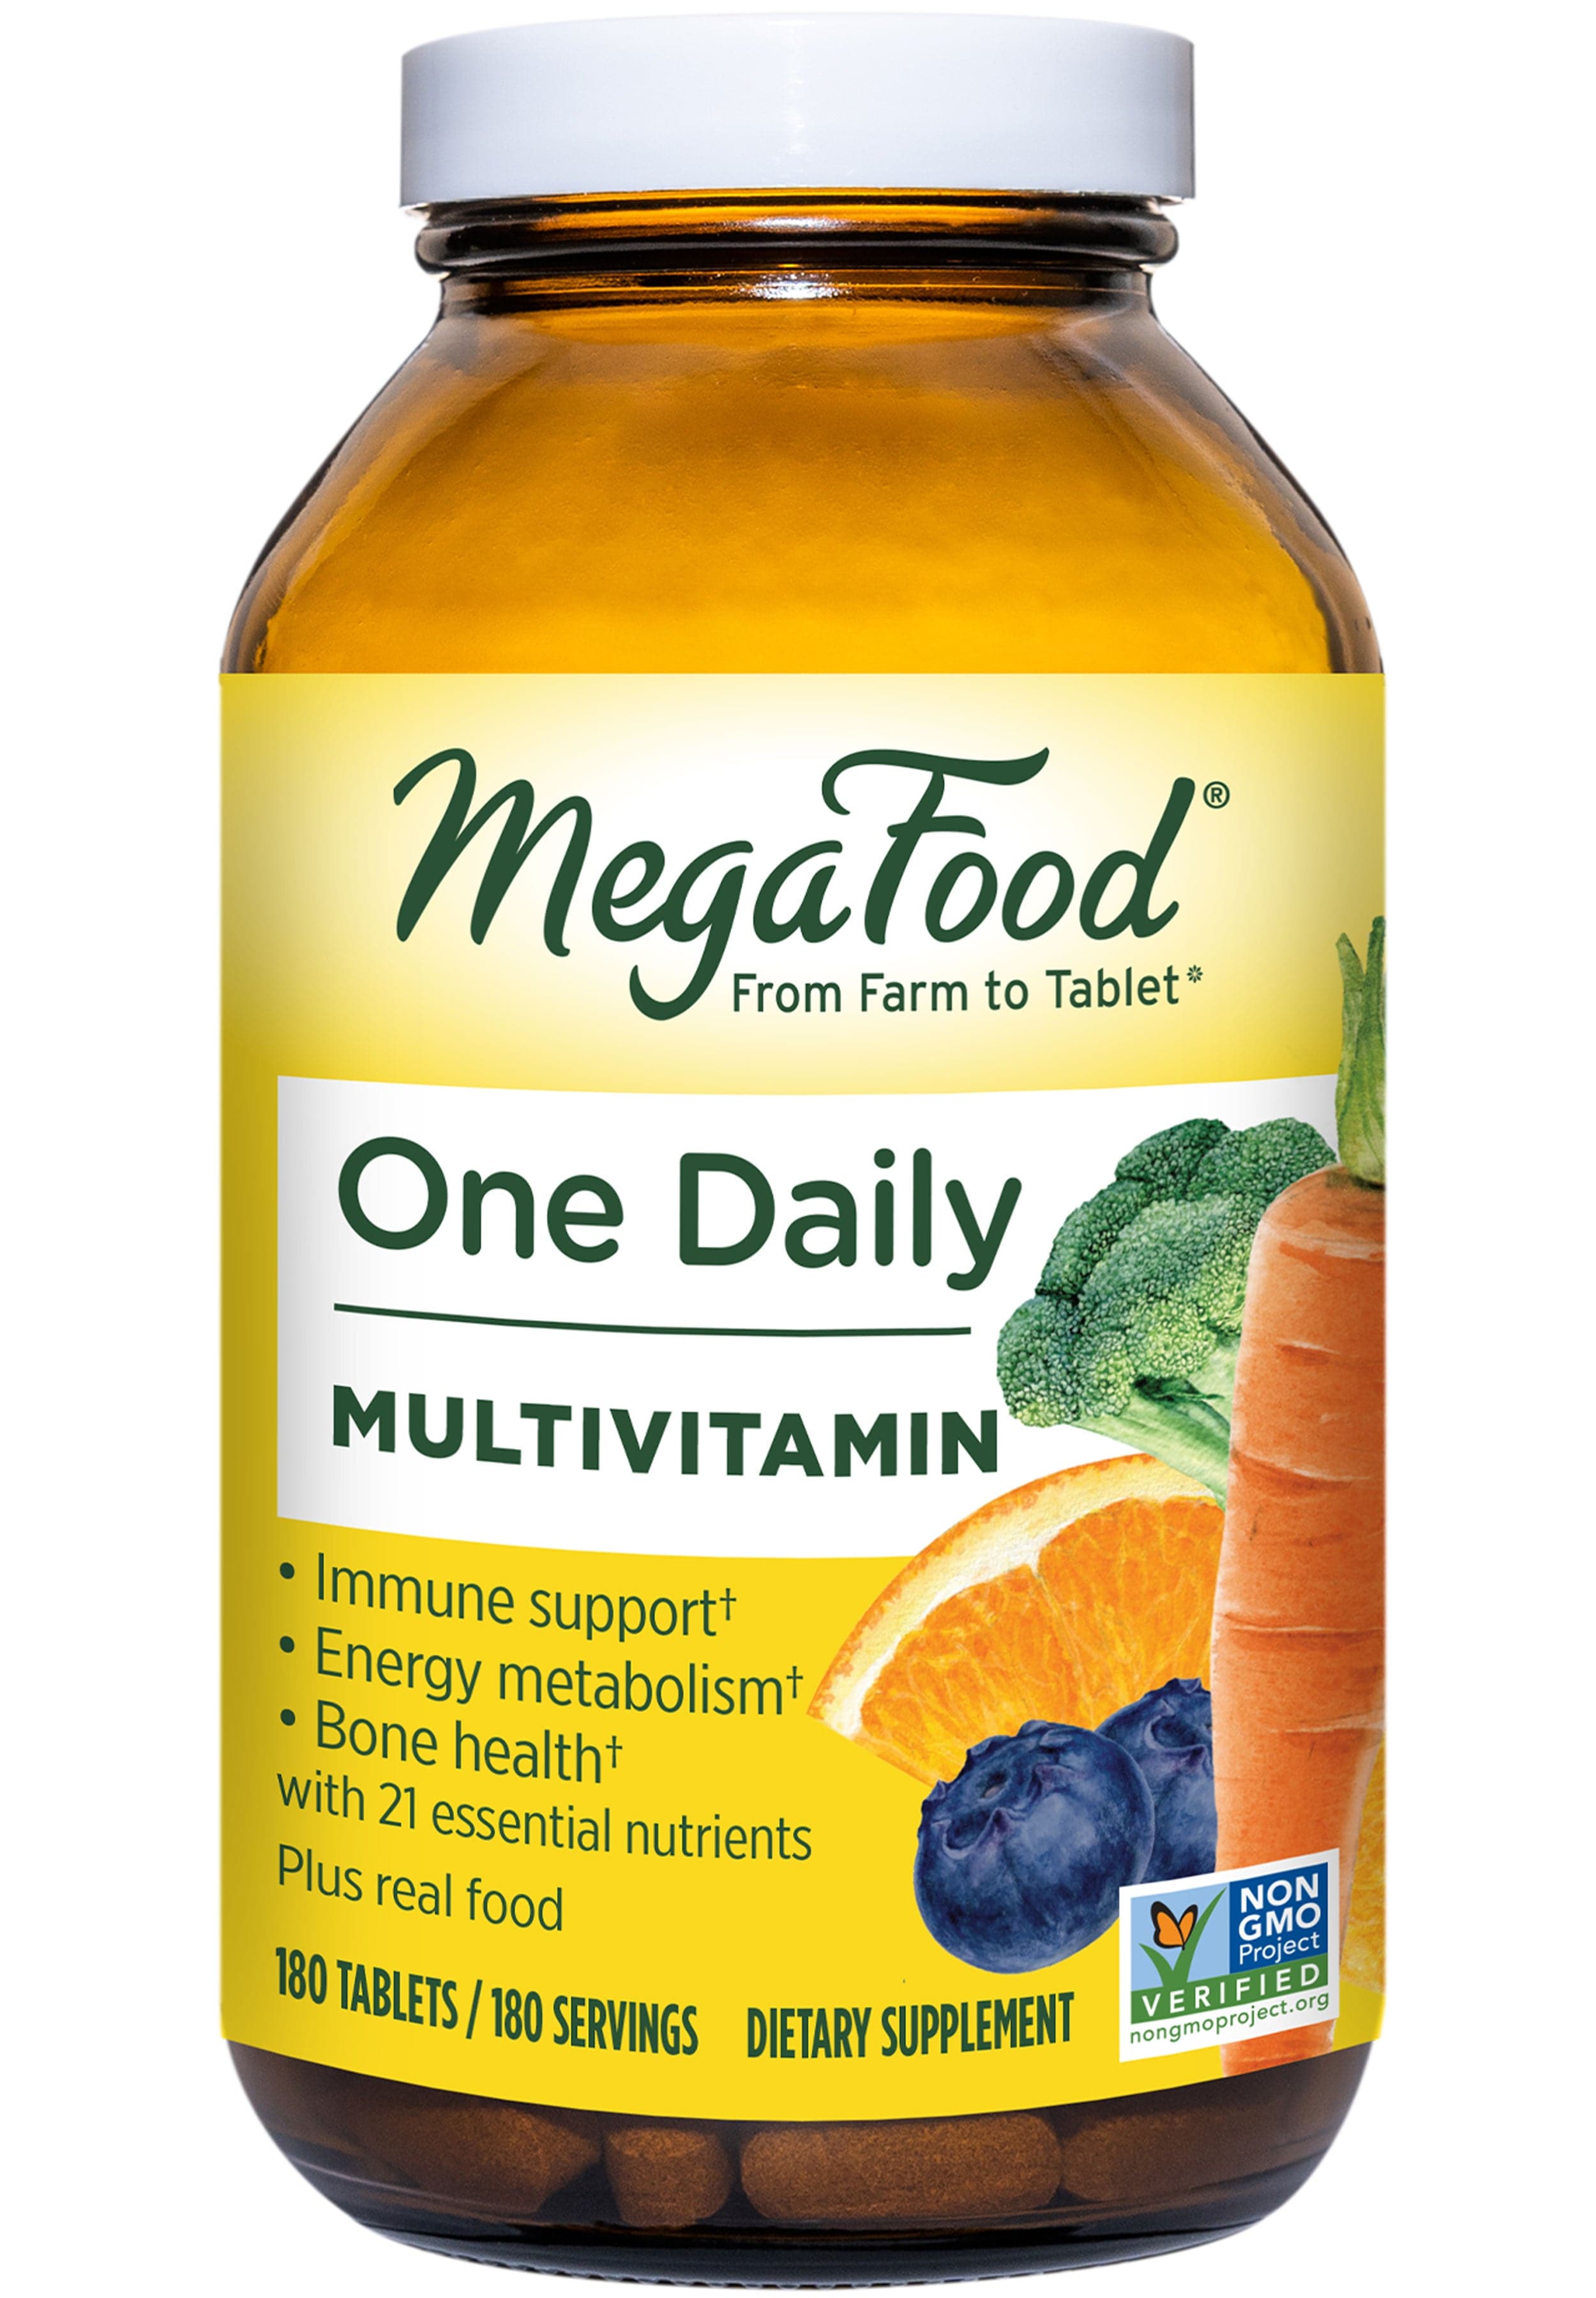 MegaFood One Daily Multivitamin Ingredients 